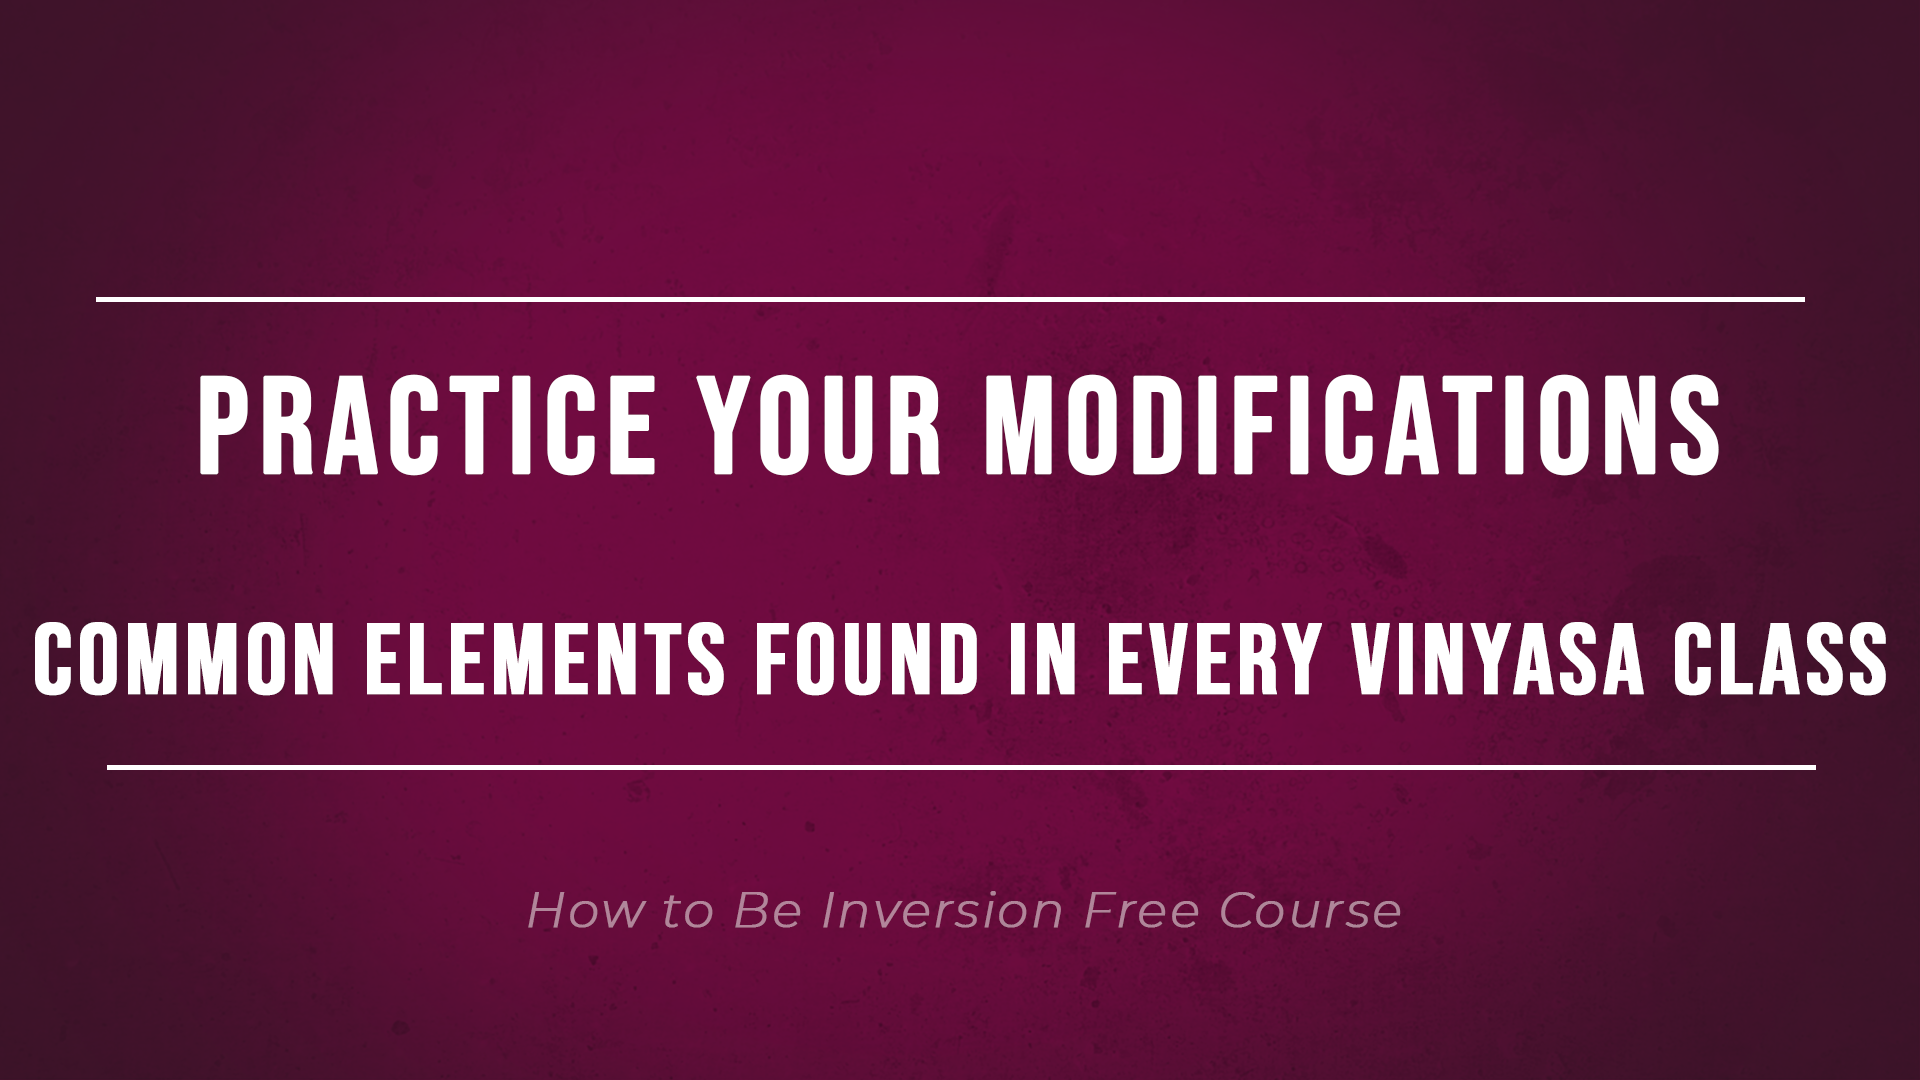 Practice Your Modifications common elements found in every vinyasa class